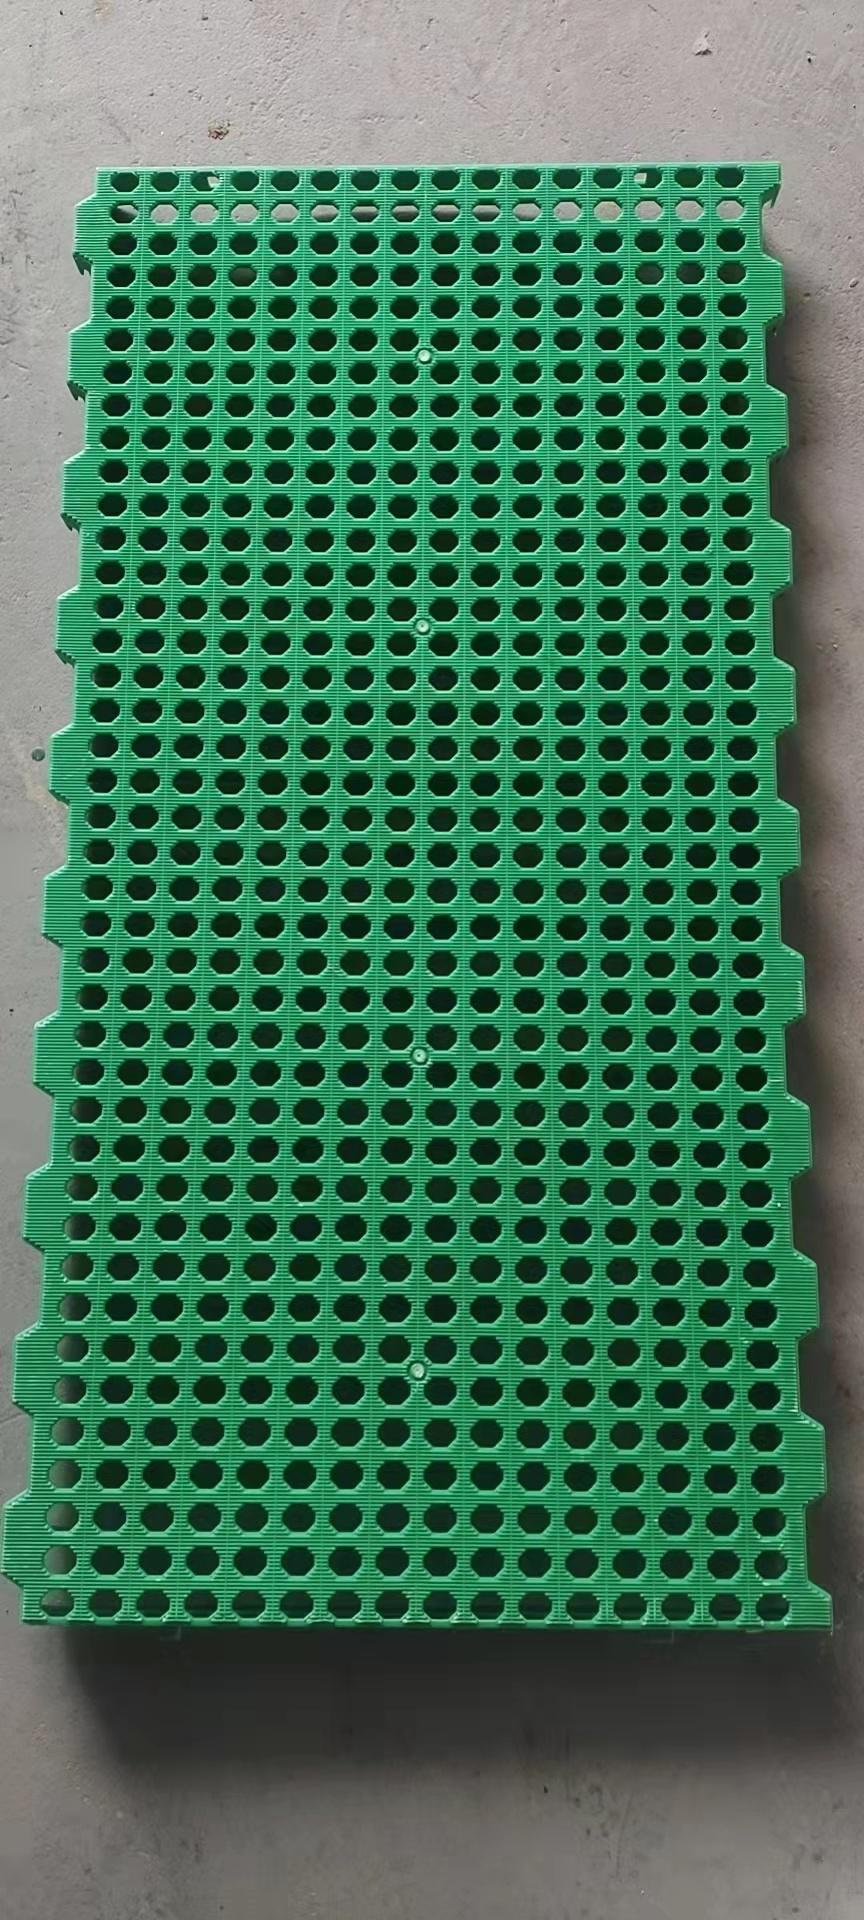 High-Tech Injection Molding From Virgin Quality Polypropylene Co-Polymer Plastic Flooring